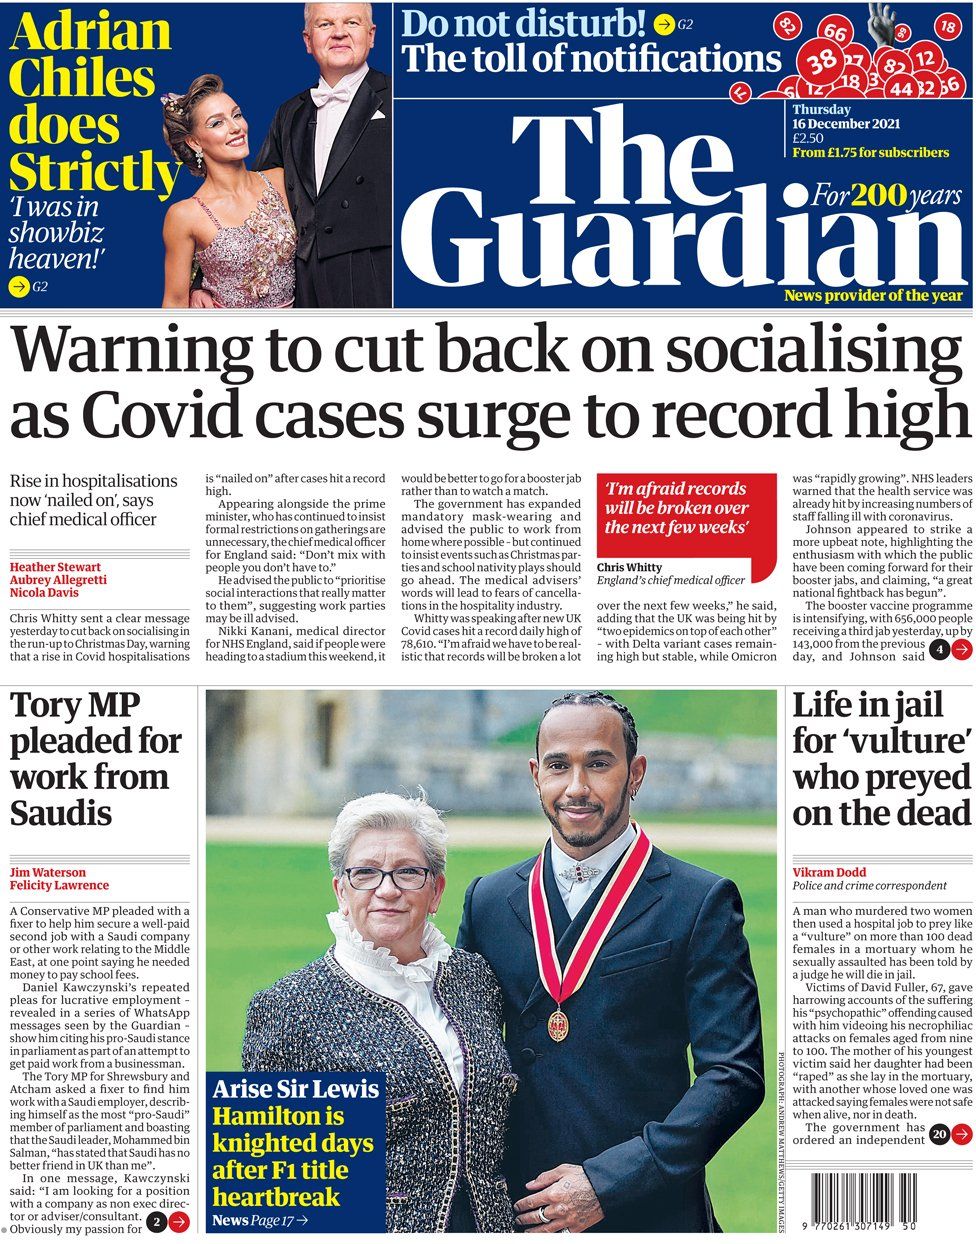 The Guardian - ‘Warning to cut back on socialising as Covid cases surge’